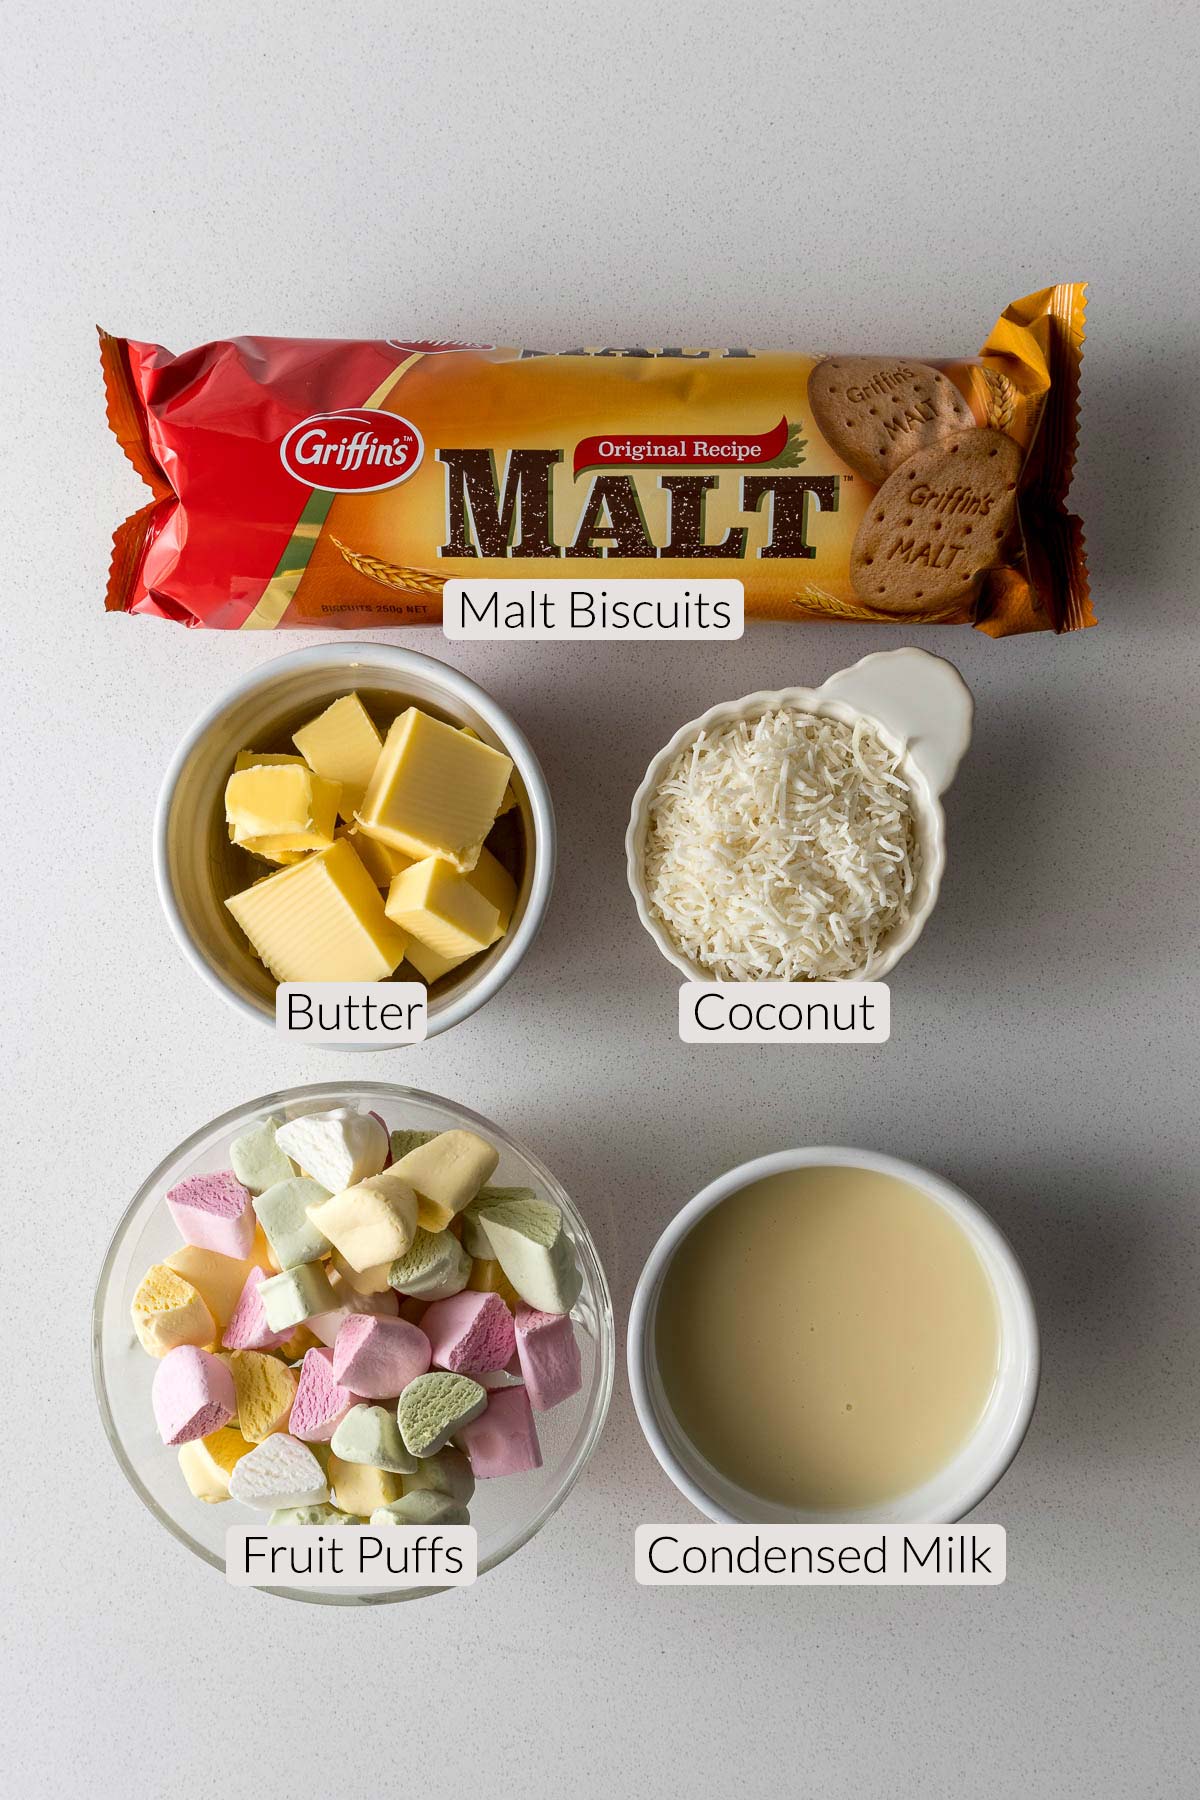 Lolly cake ingredients.